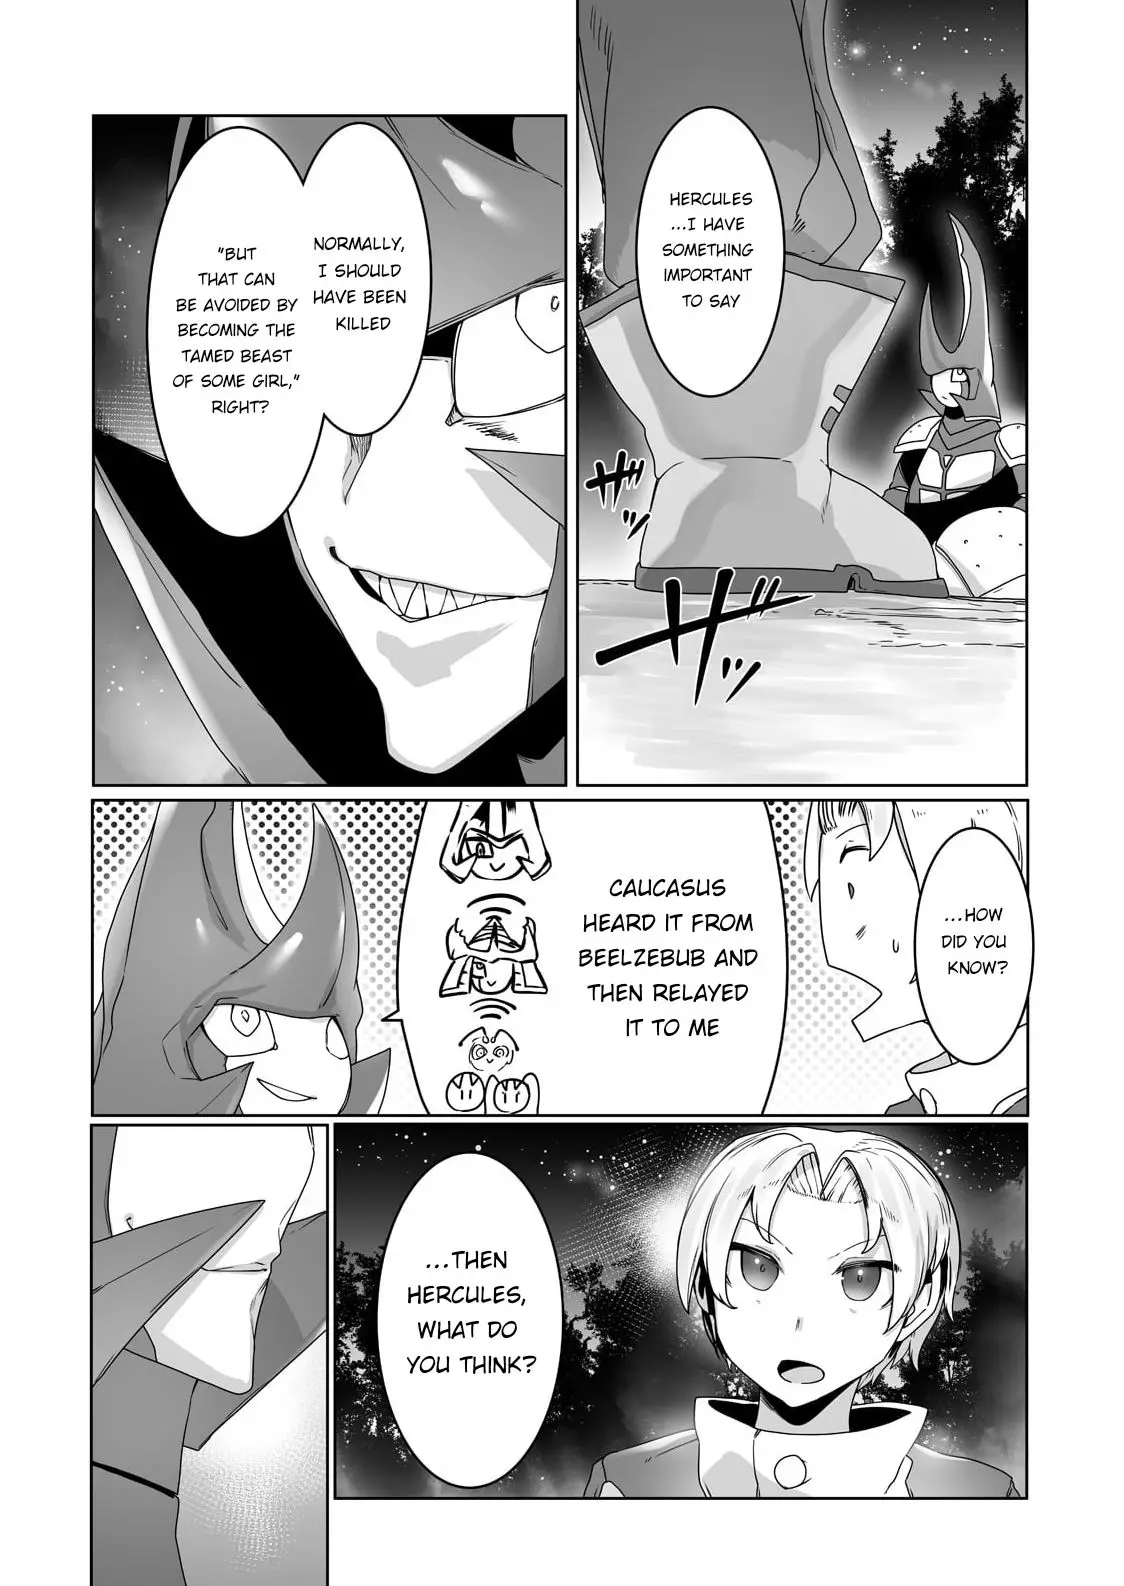 The Useless Tamer Will Turn Into The Top Unconsciously By My Previous Life Knowledge - 19 page 18-1ec2beae